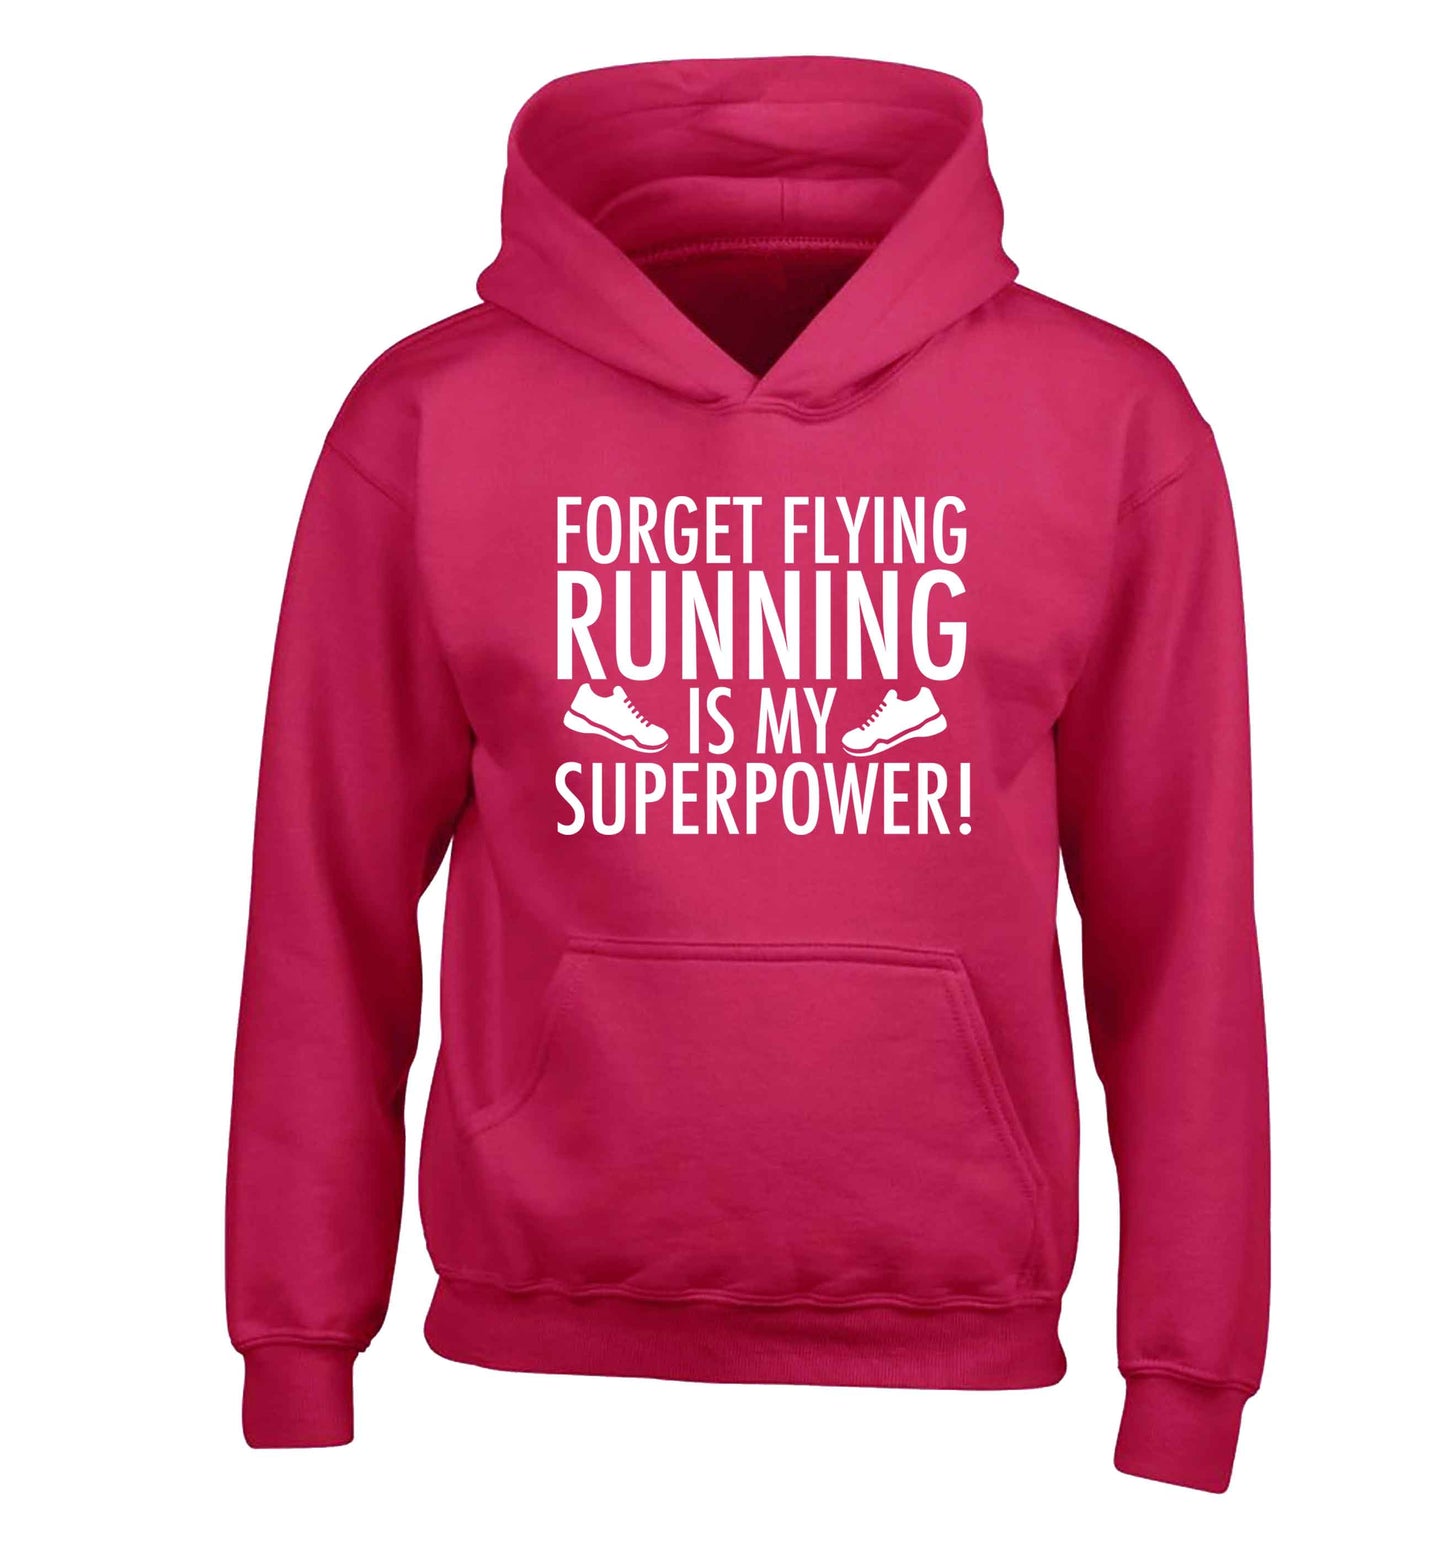 Forget flying running is my superpower children's pink hoodie 12-13 Years